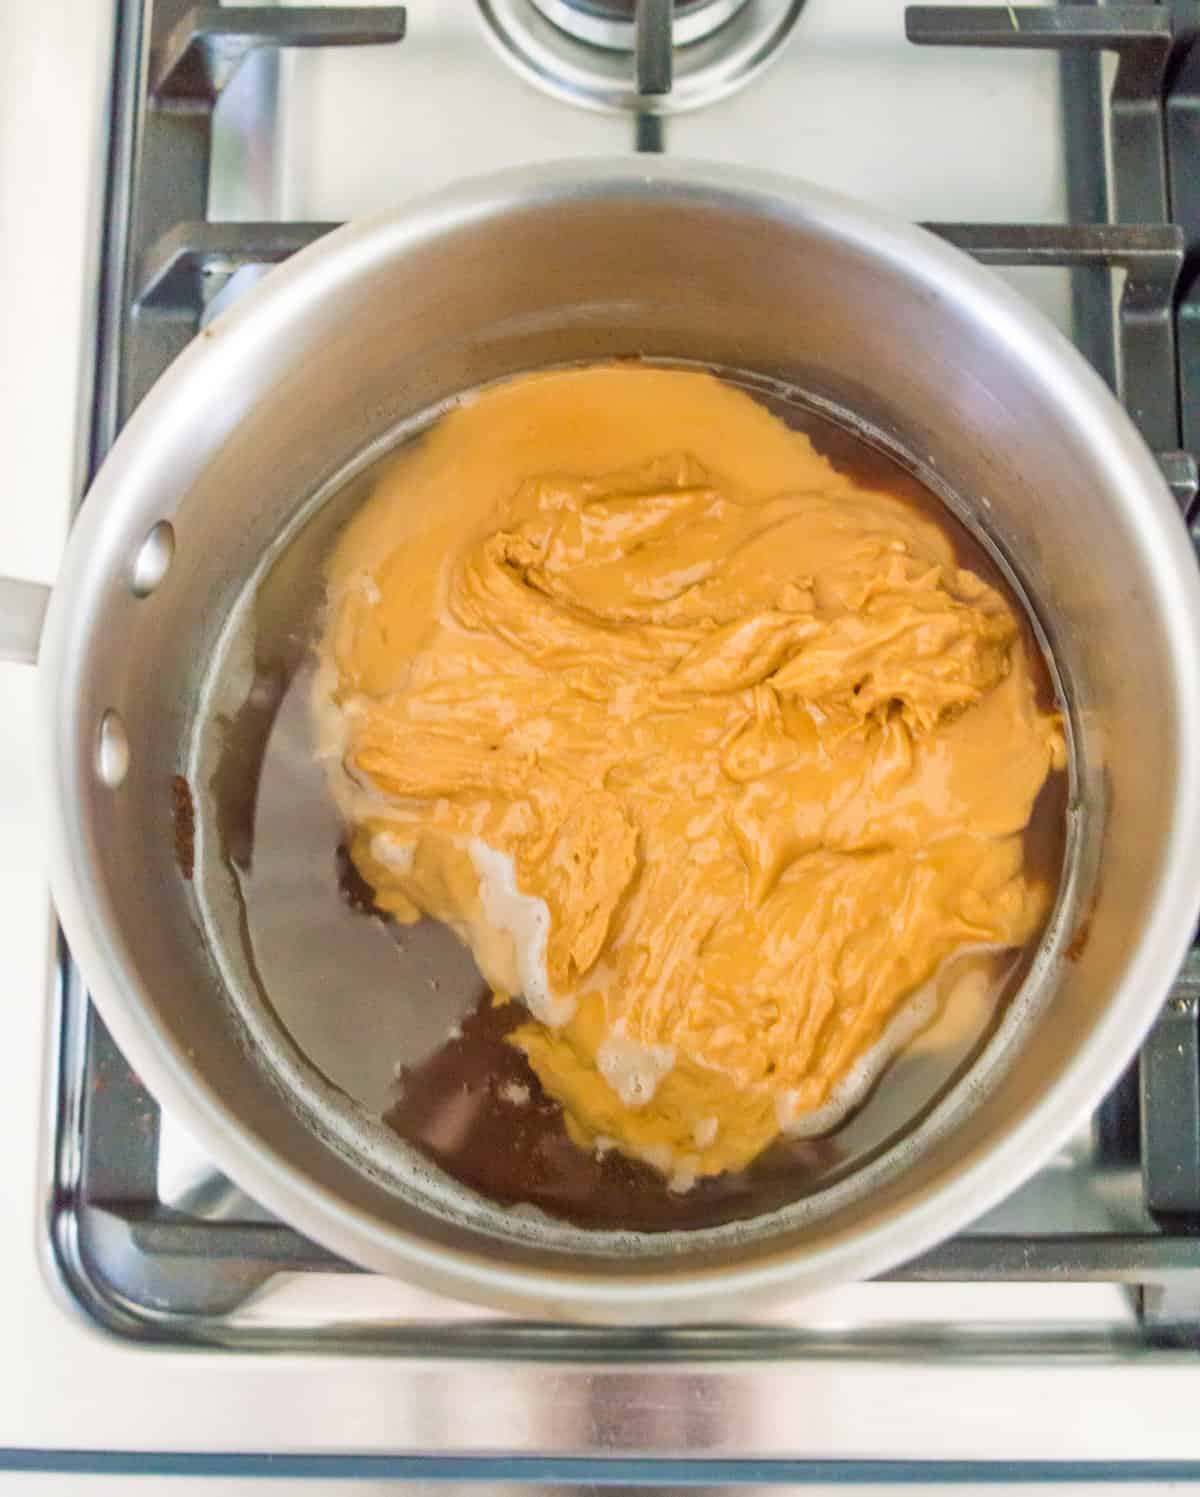 Peanut butter, coconut oil and maple syrup in a pot on the stovetop.